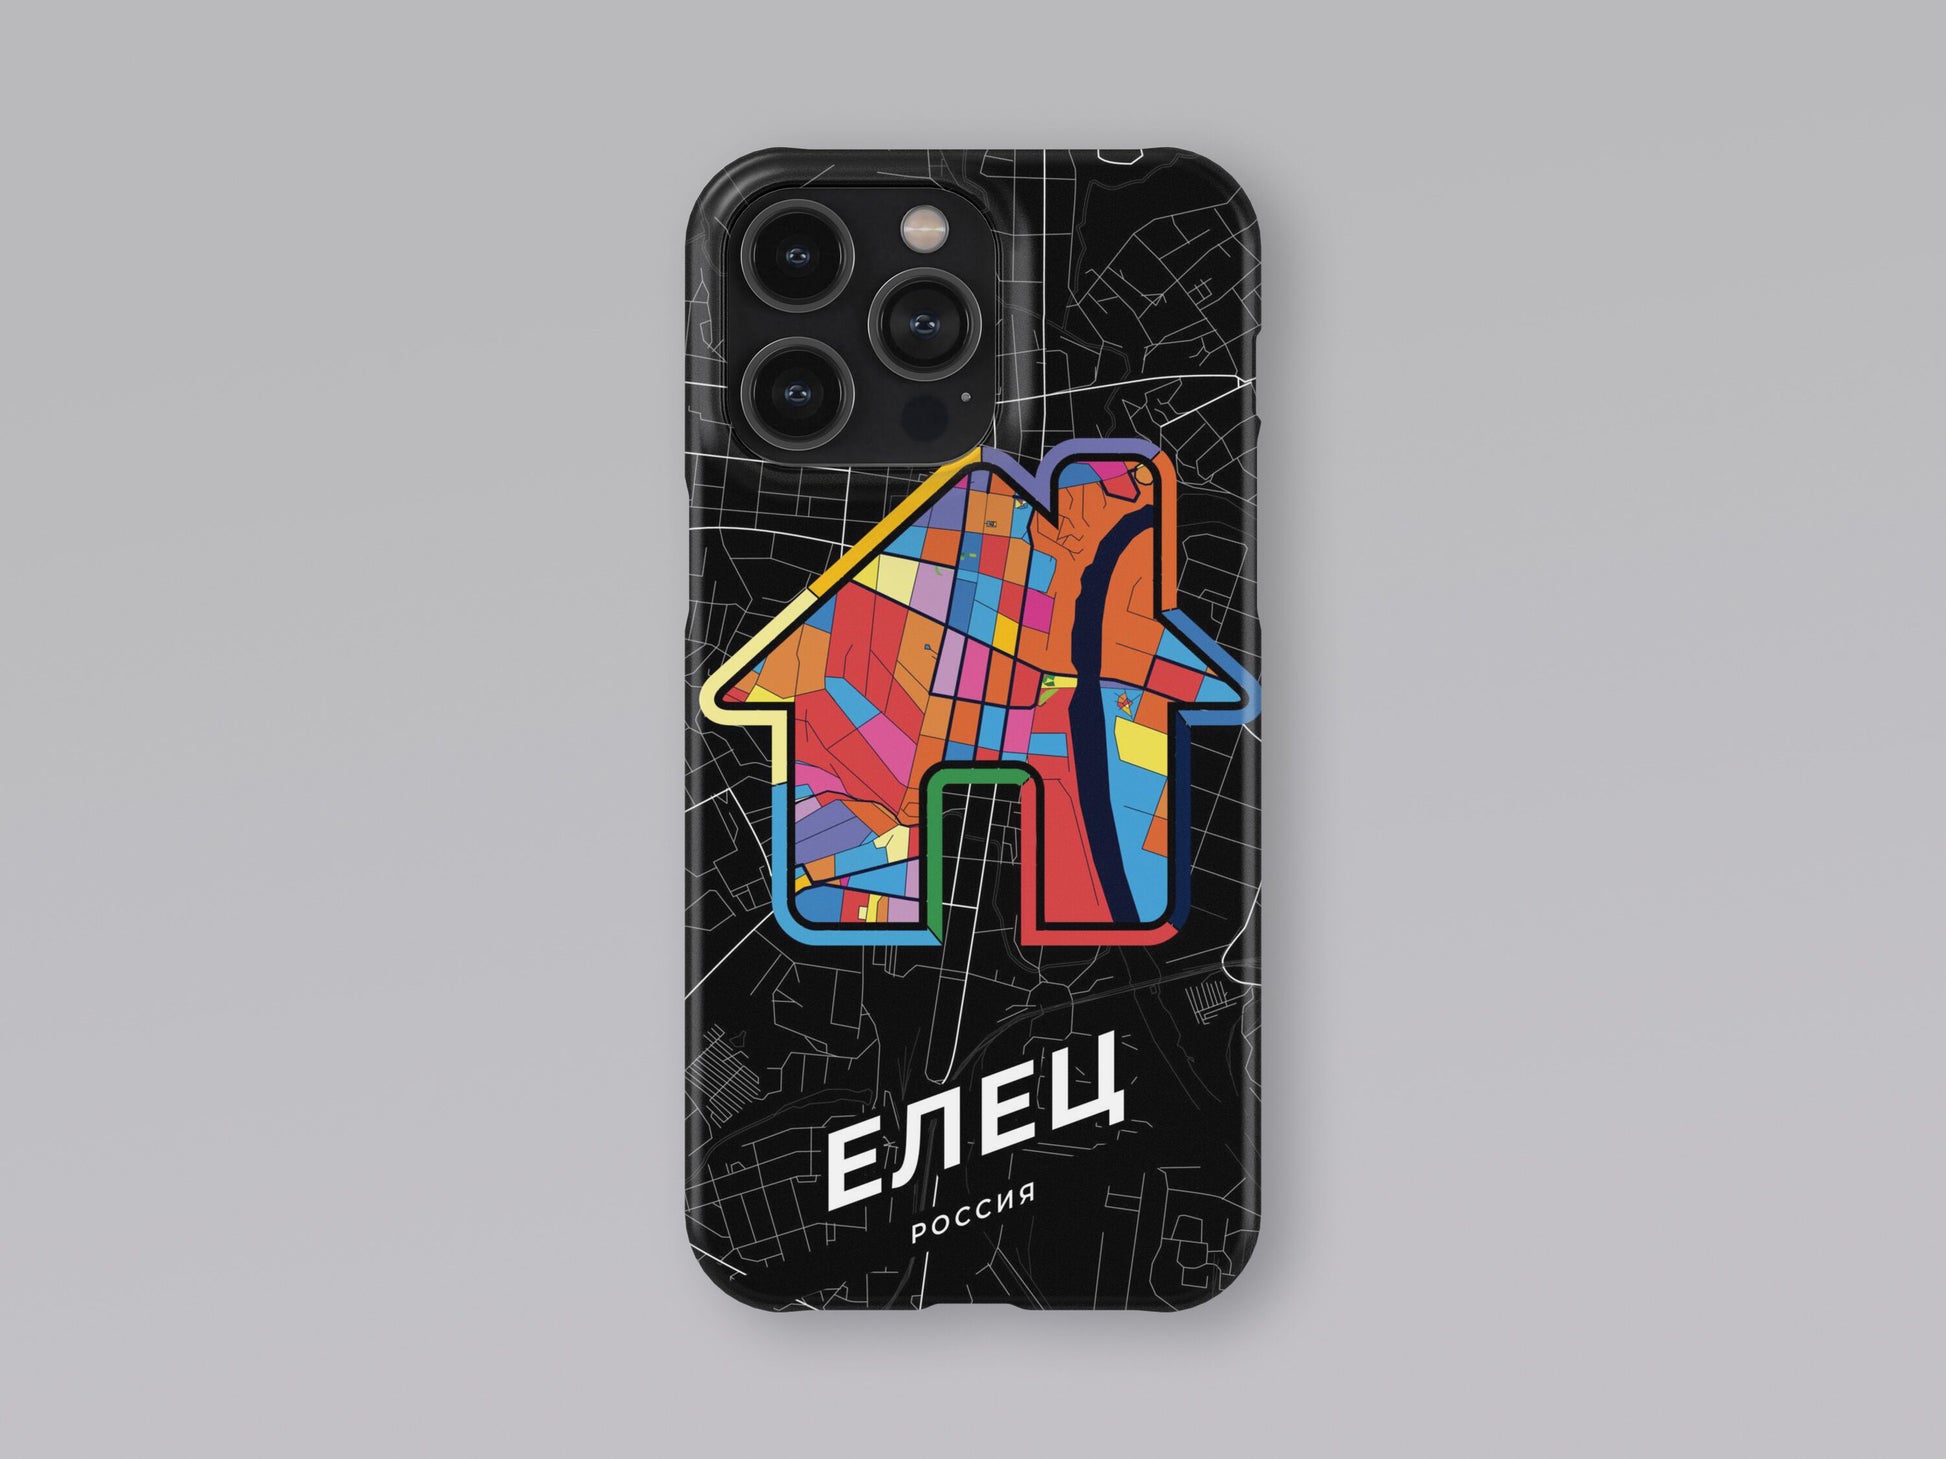 Yelets Russia slim phone case with colorful icon 3